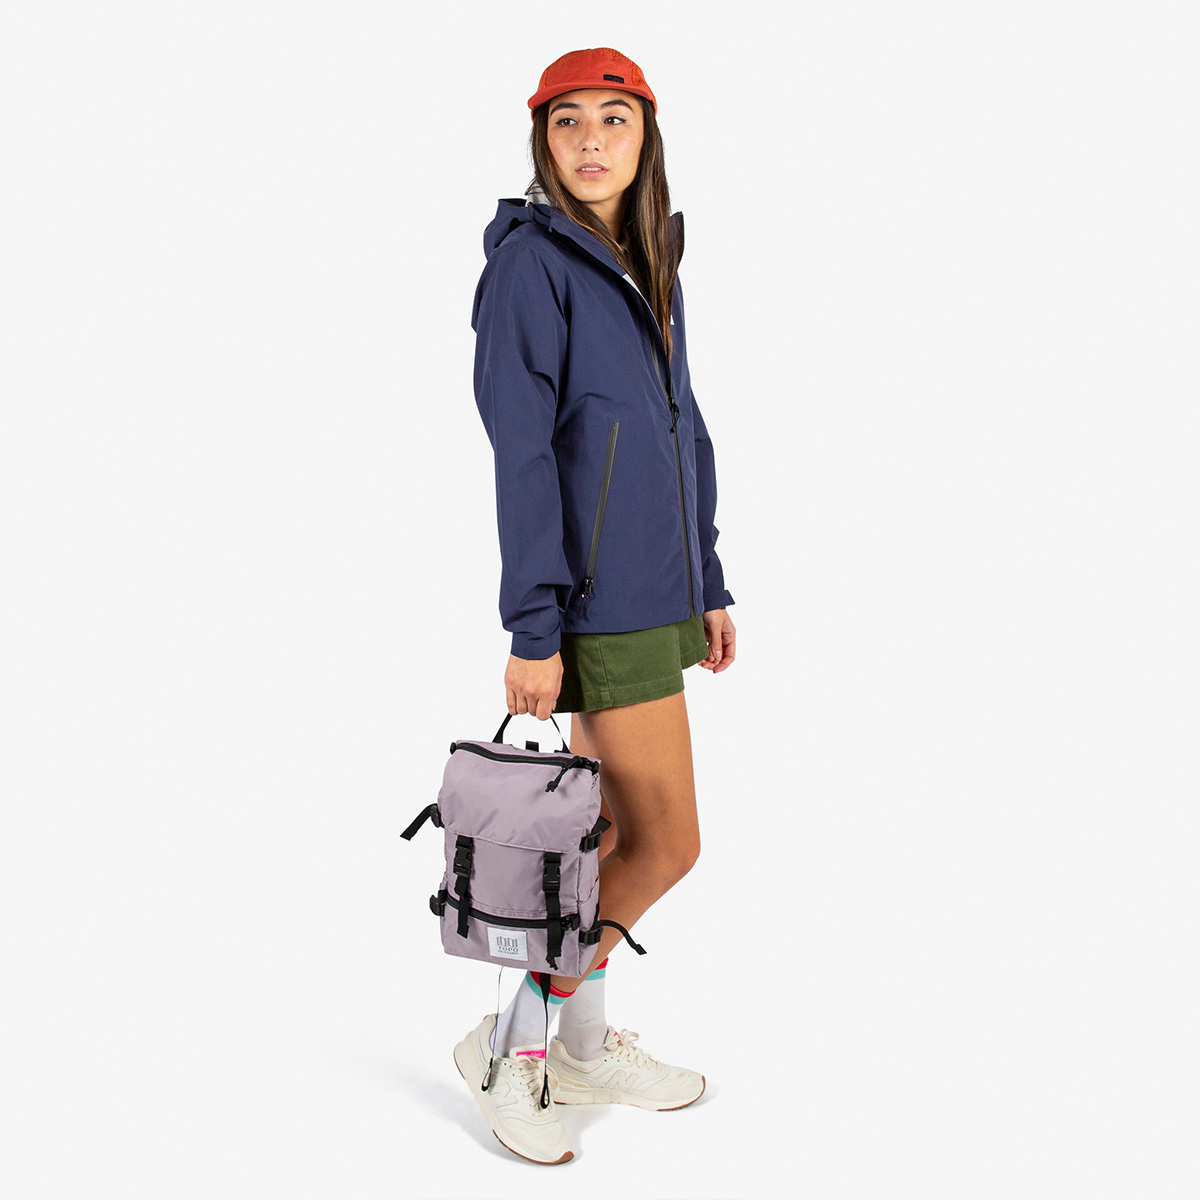 Topo Designs Rover Pack - Mini Light Purple, statement-making bag that’s the perfect size for errands around town or on the trail